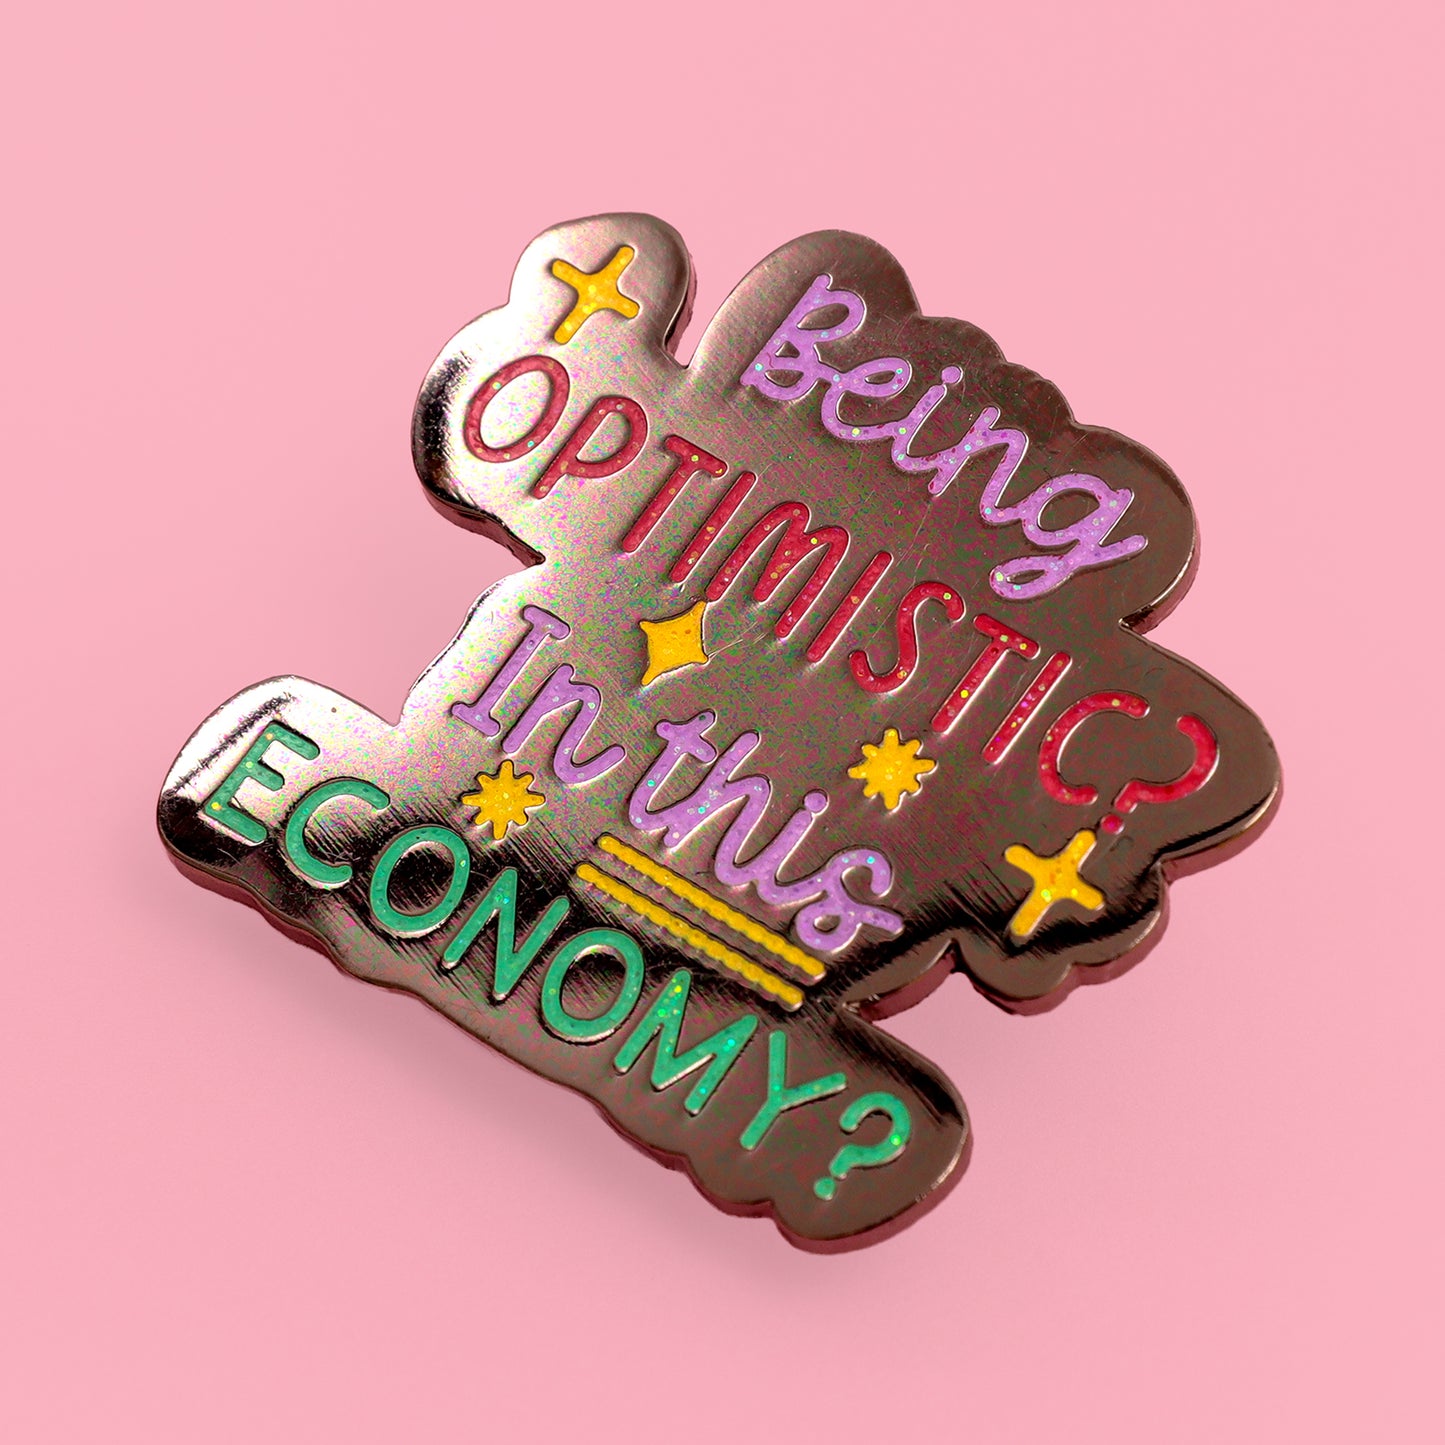 Being Optimistic? In this economy? Enamel pin